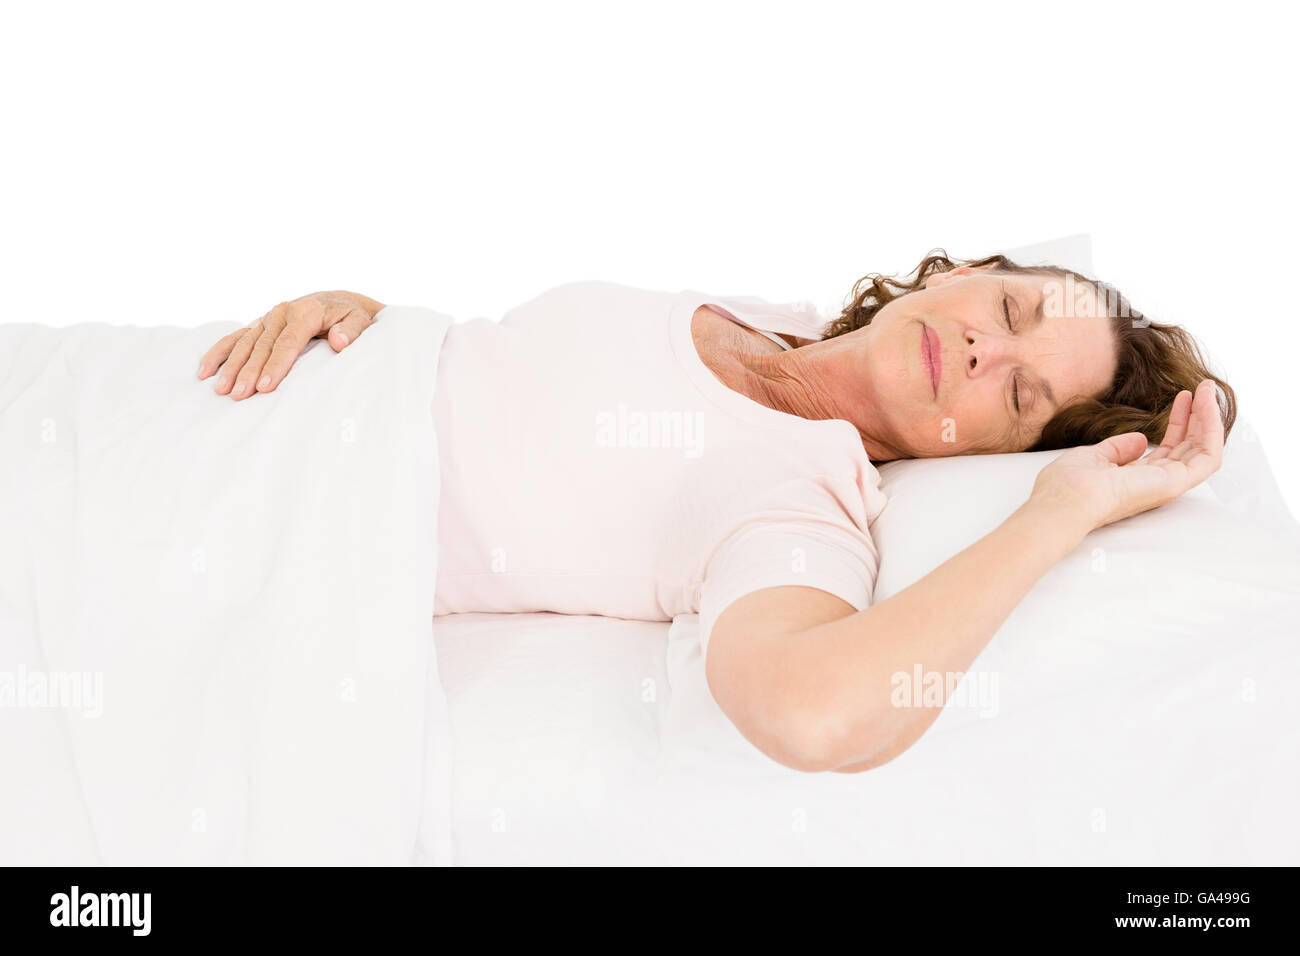 Mature woman relaxing on bed Stock Photo